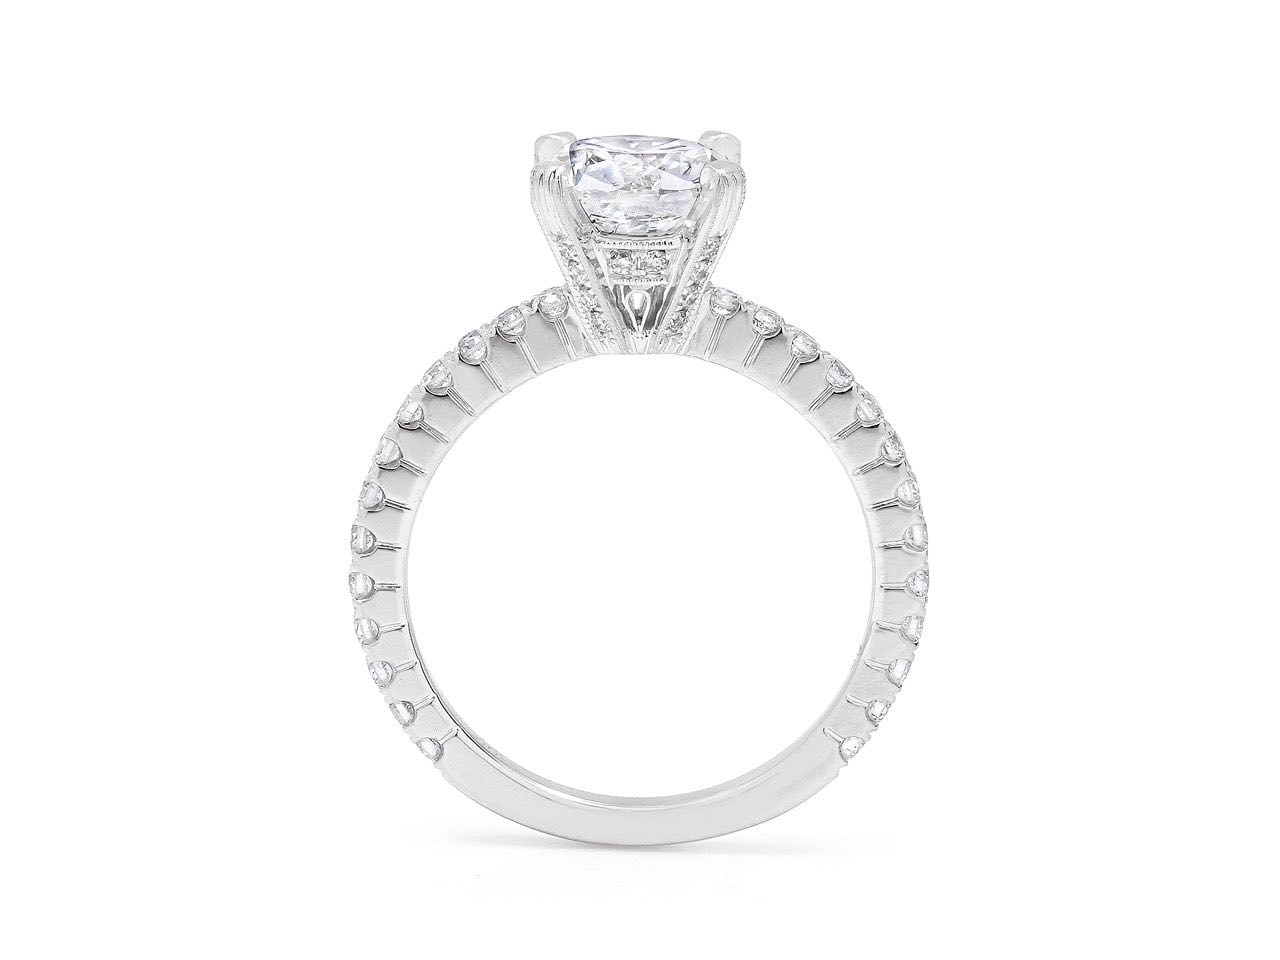 Diamond Solitaire Ring, 1.51 carats I/SI-2, in 18K White Gold